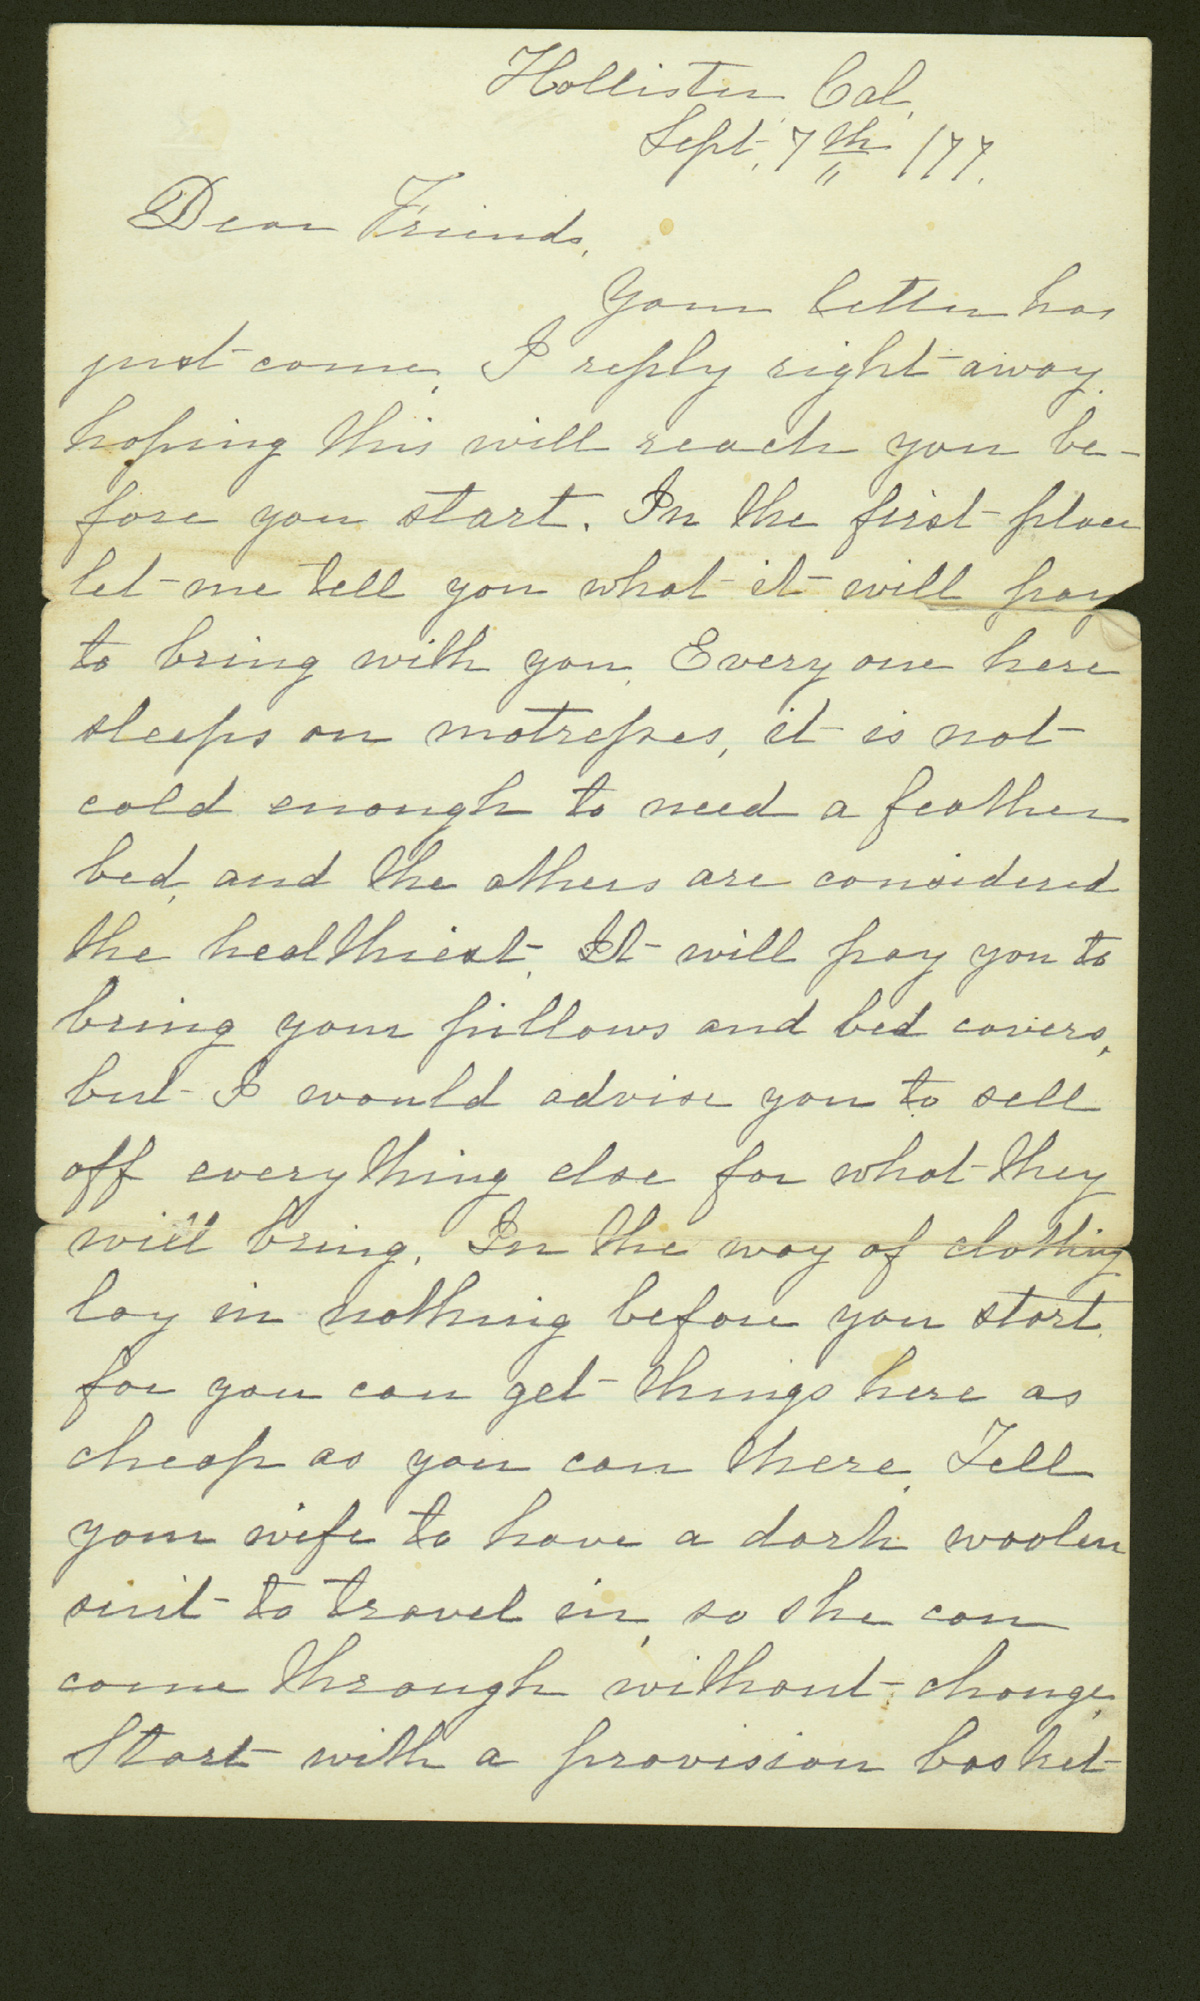 Letter fragment, McCroskey to McCallie, 1877, describing provisions needed for train